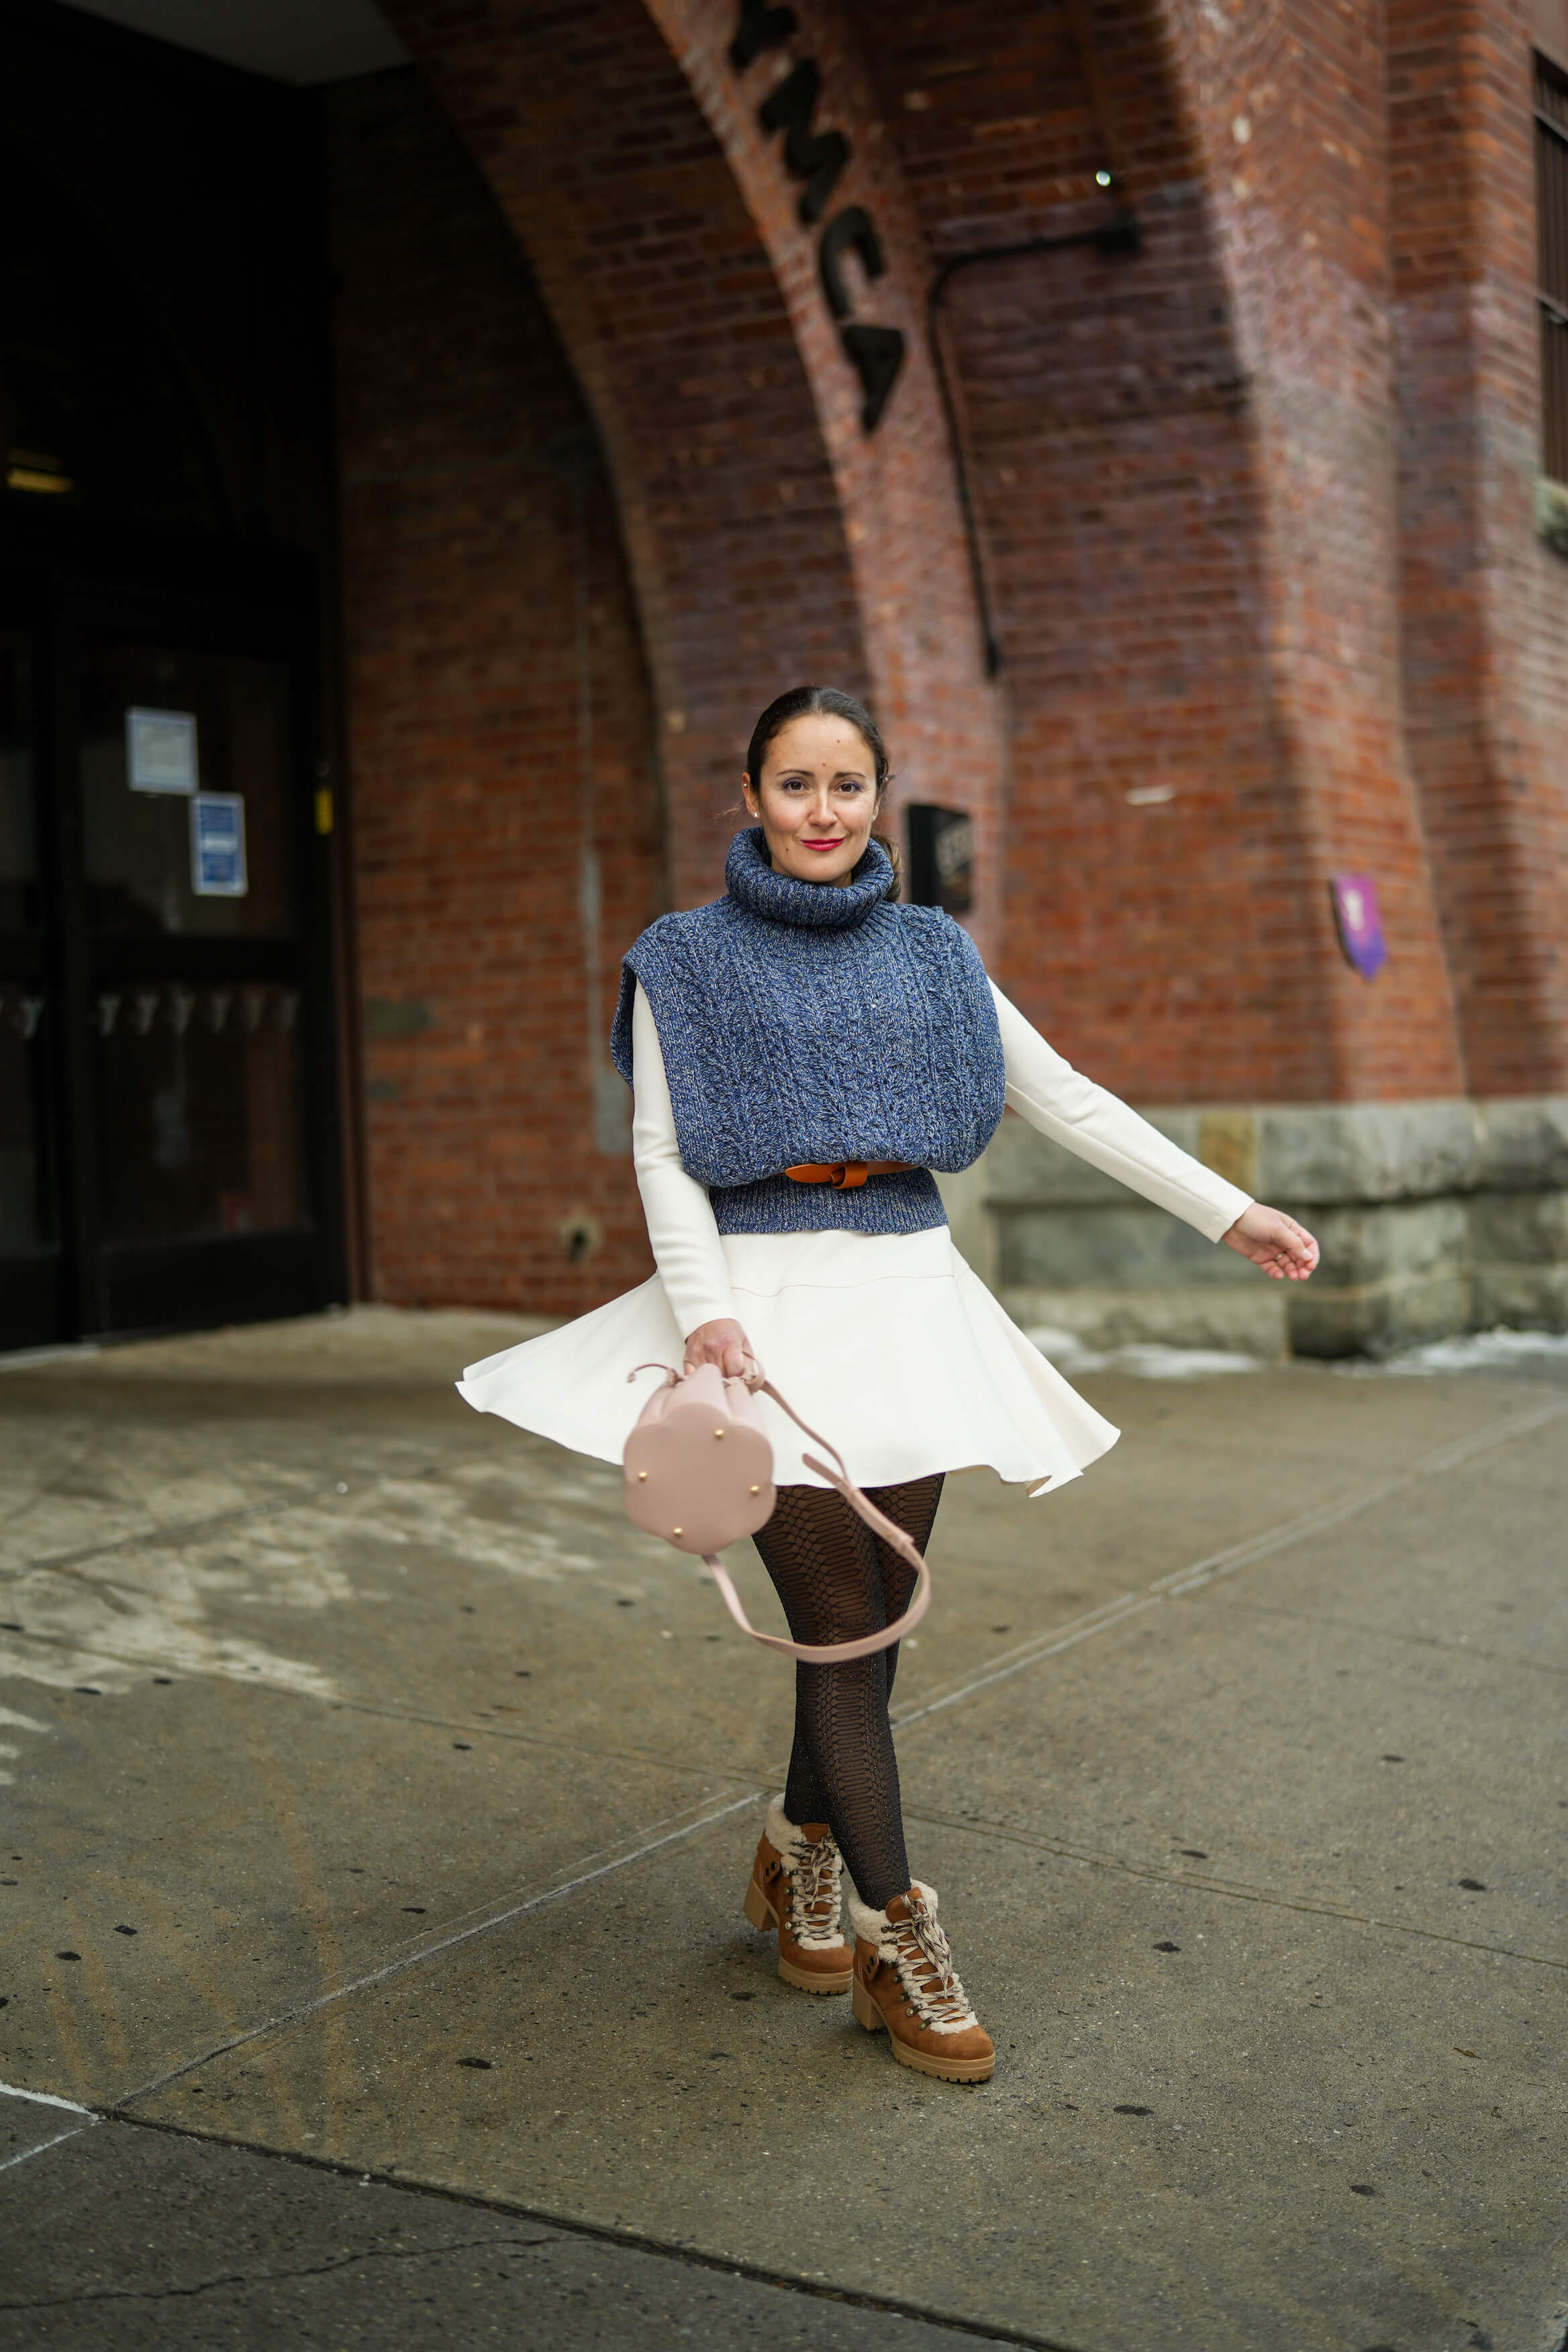 How To Update Your Winter Looks With Skirt Outfits | Le Chic Street